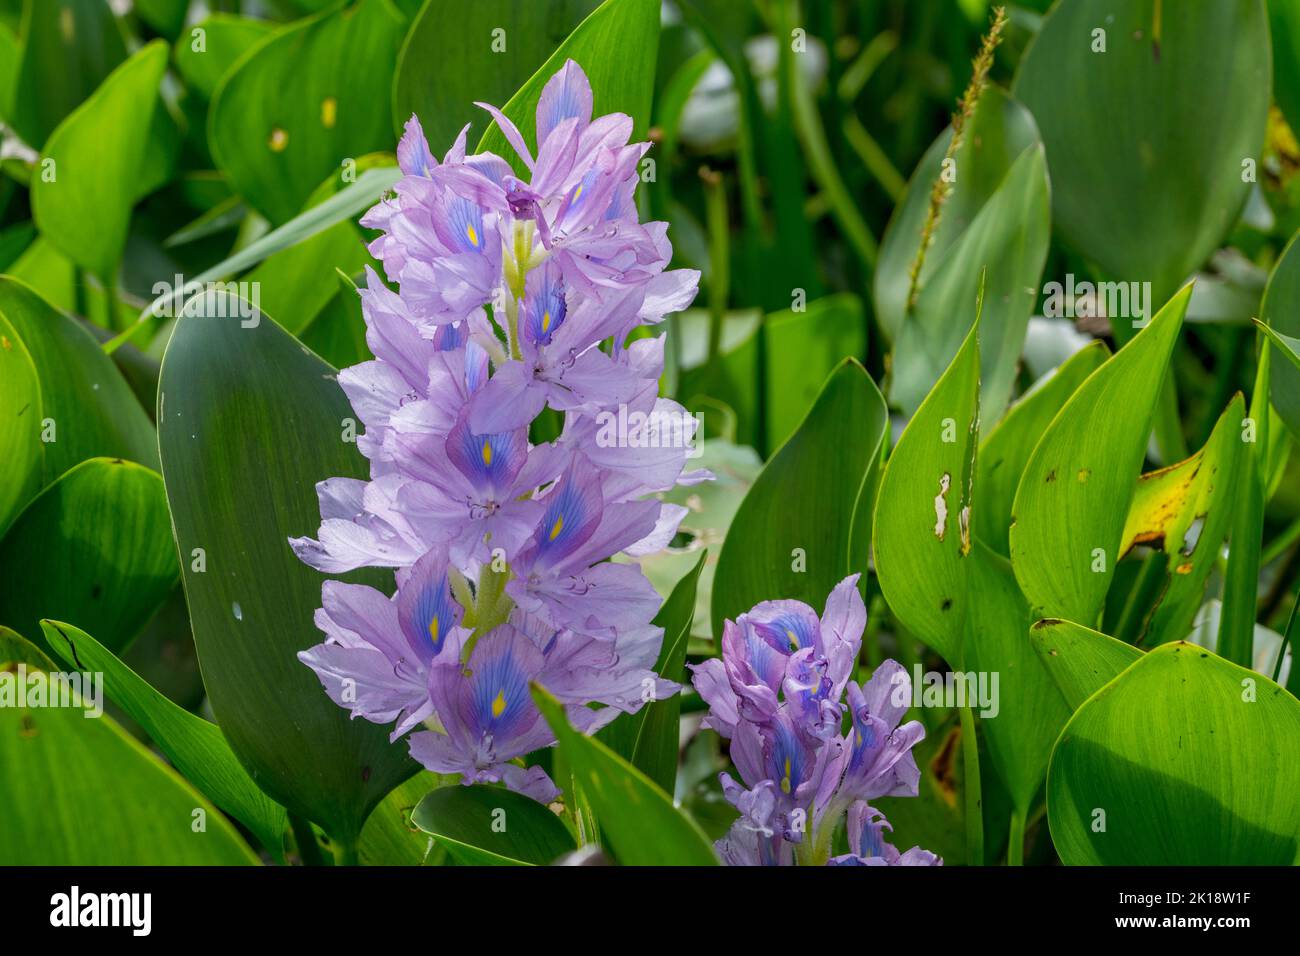 Flowering water hyacinths in a wetland near the Piuval Lodge in the Northern Pantanal, State of Mato Grosso, Brazil. Stock Photo